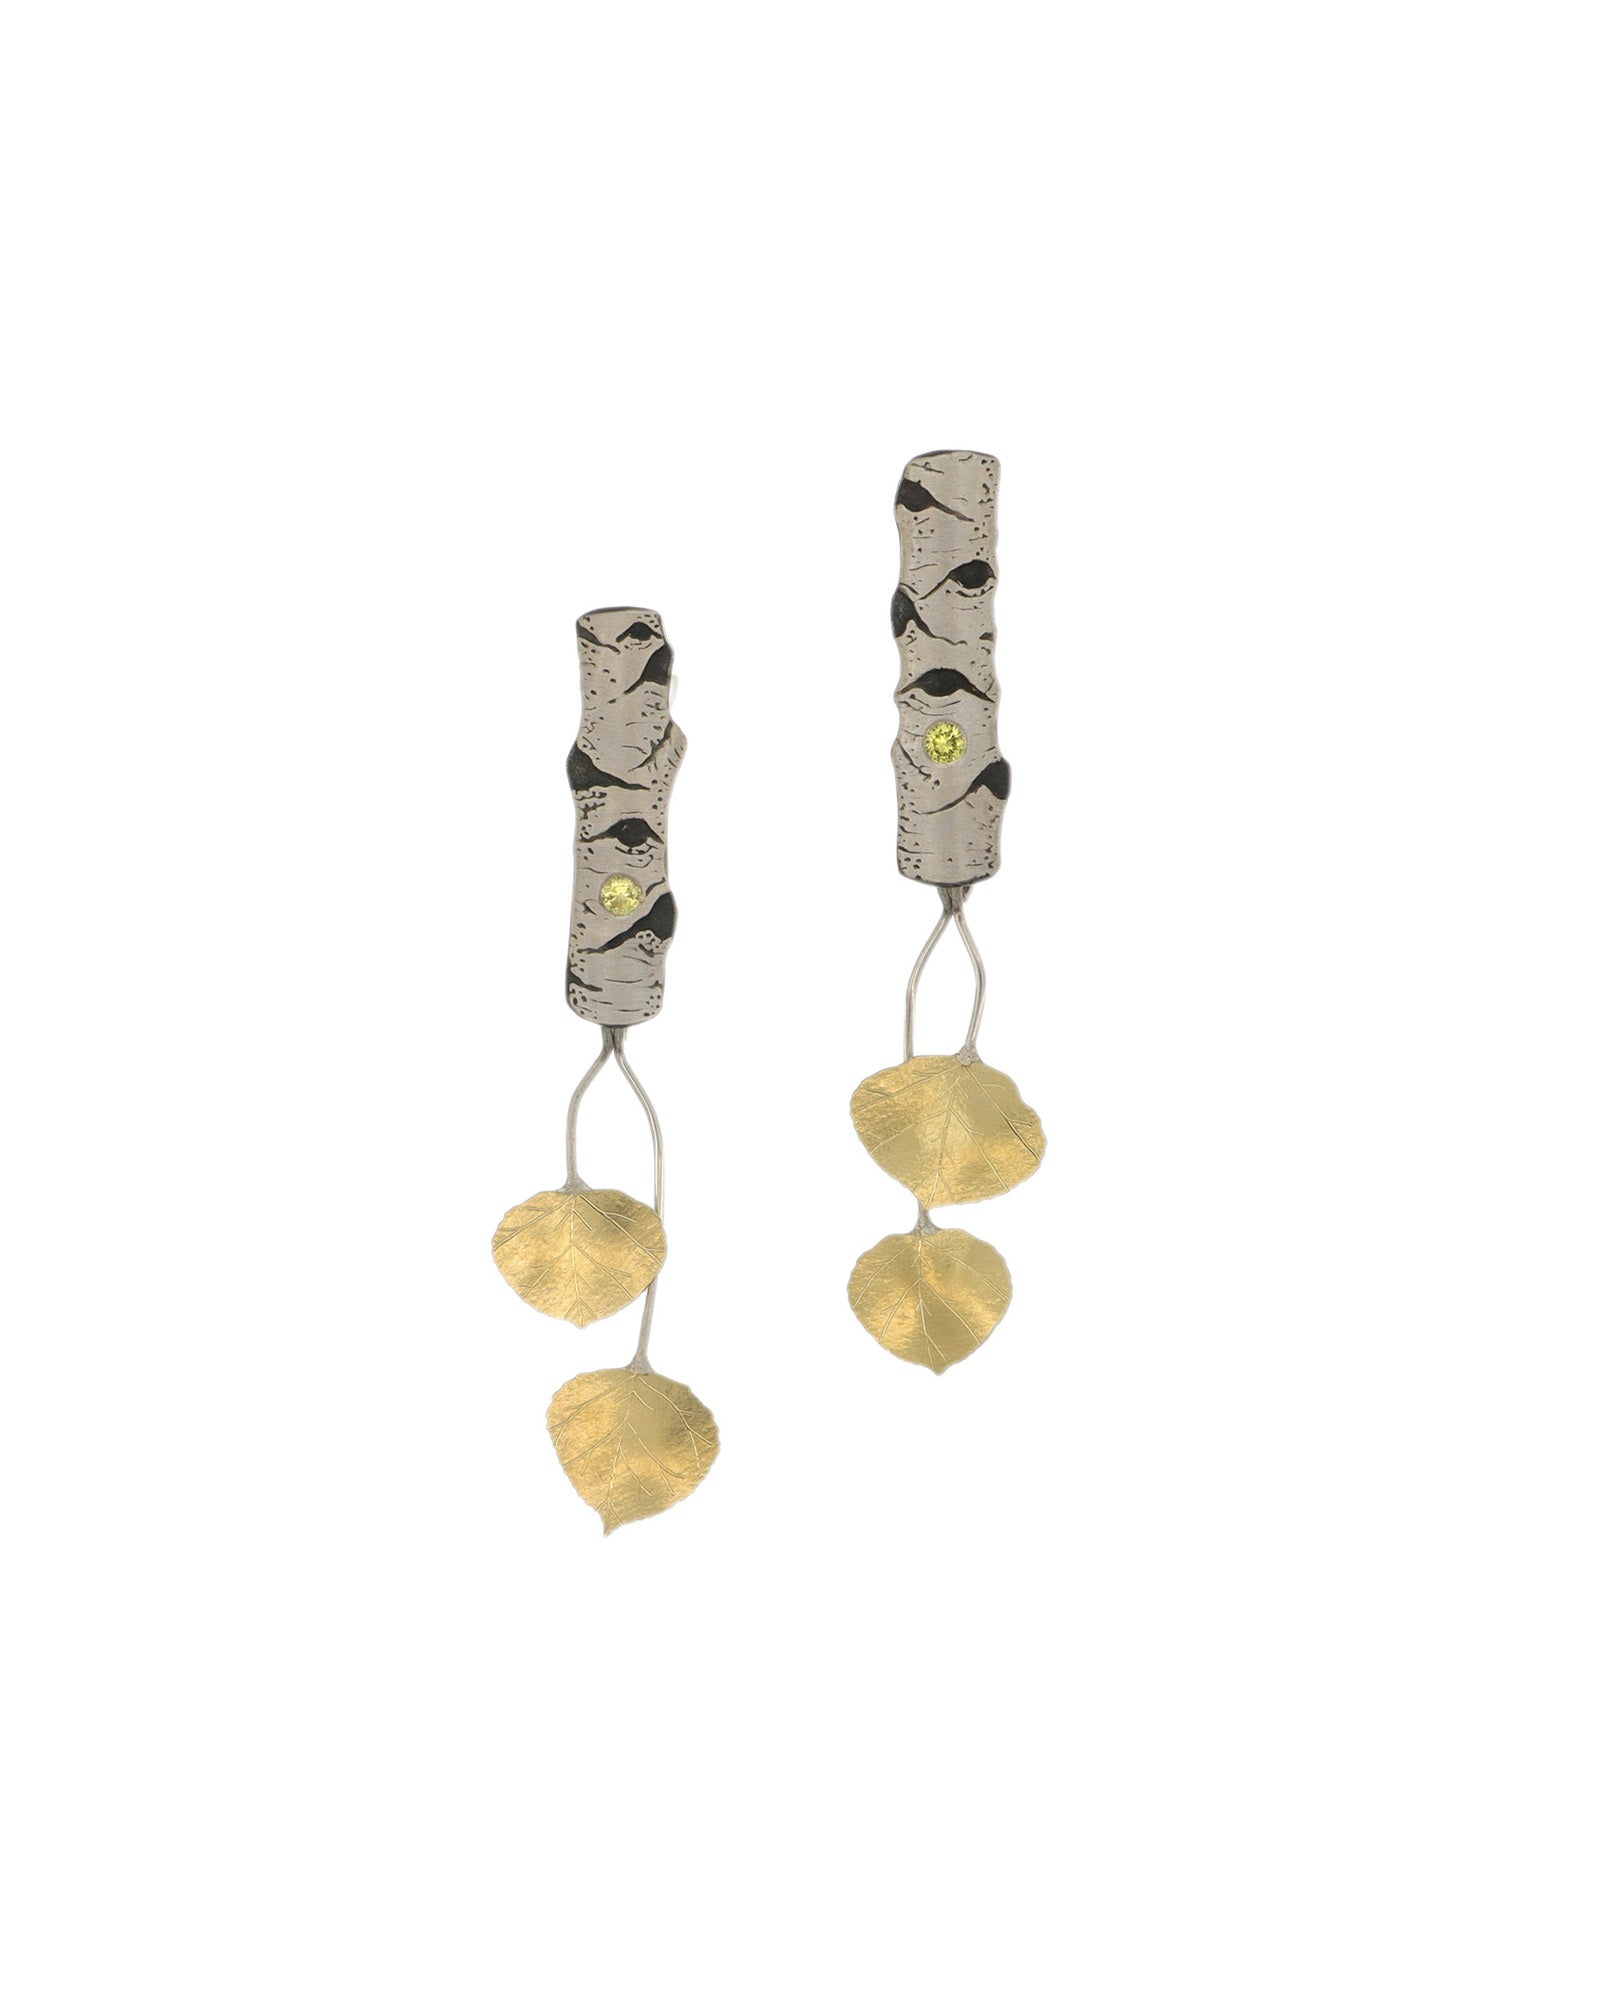 Aspen Allure earrings with leaves and sapphire